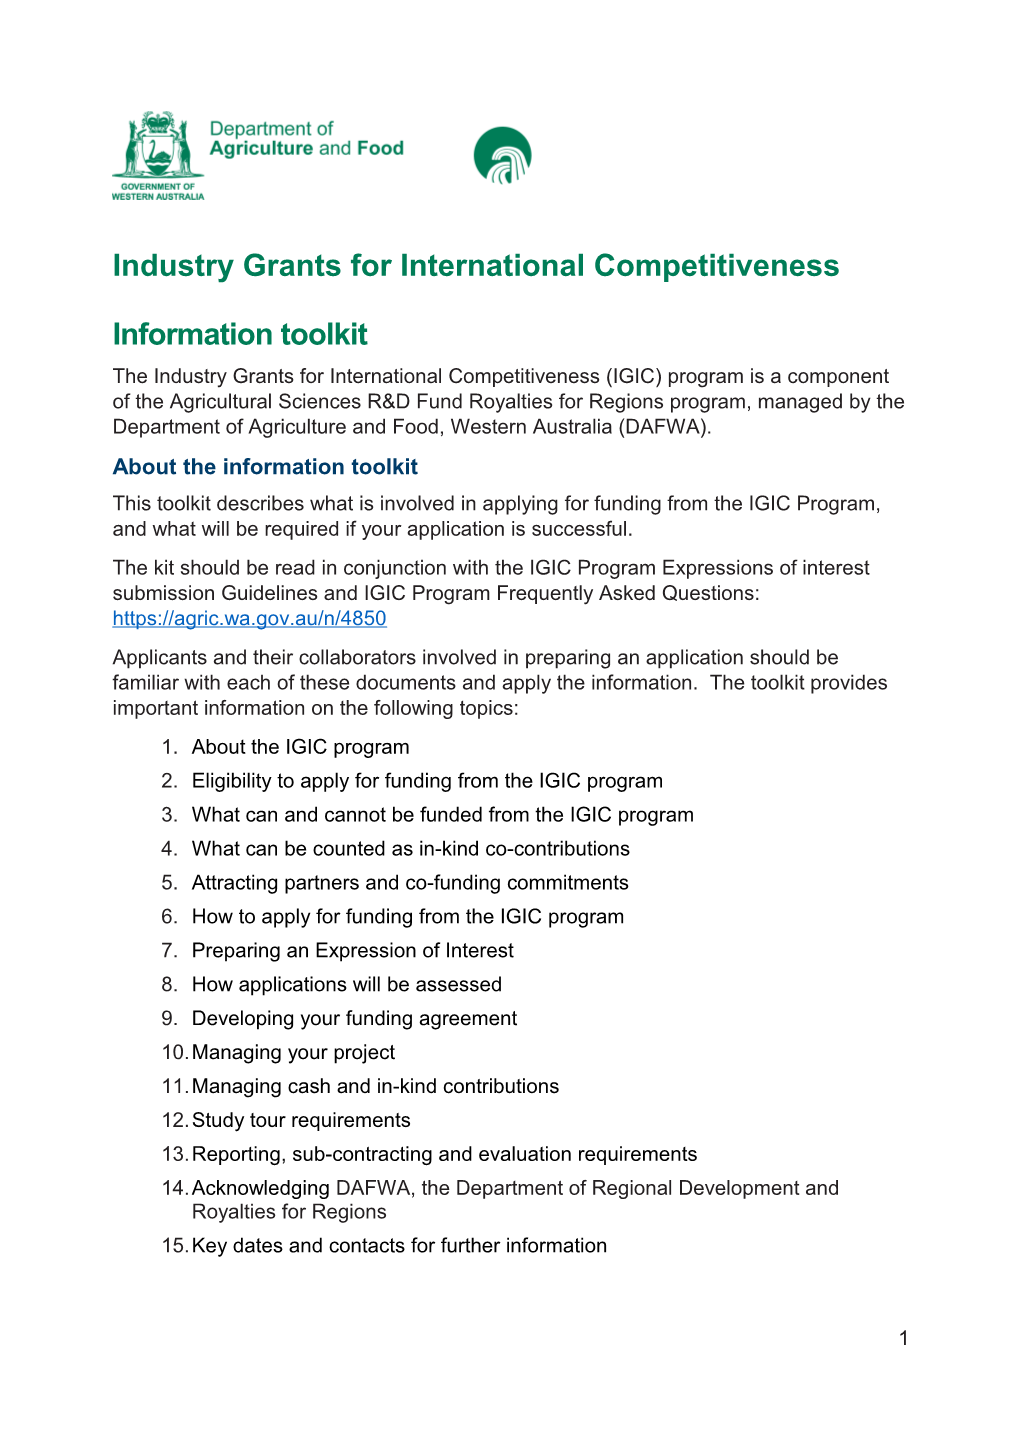 Industry Grants for International Competitiveness